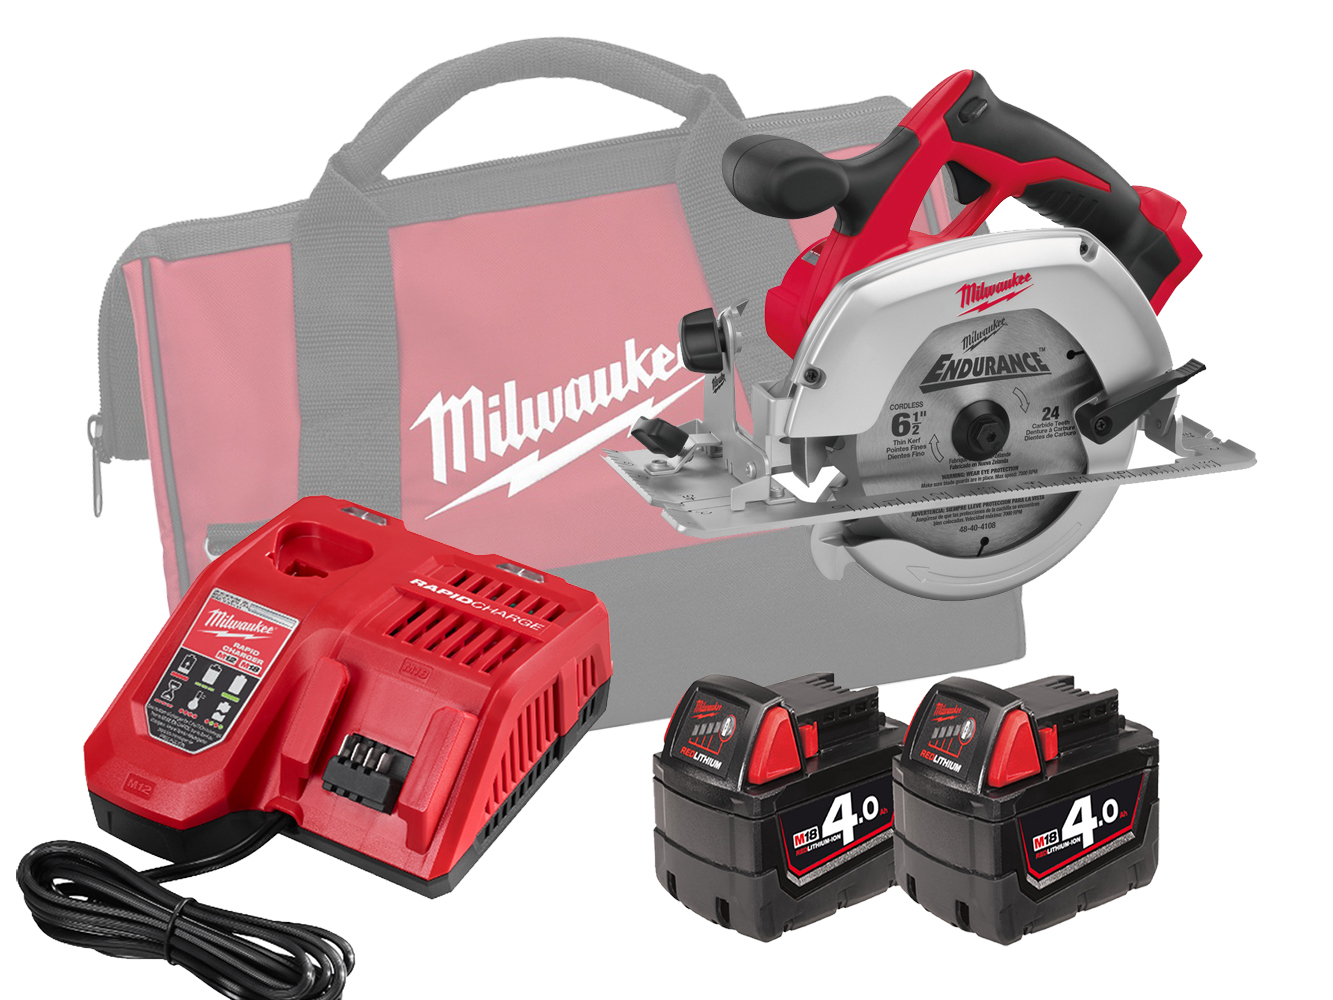 Milwaukee HD18CS 18V Heavy Duty 165mm (55mm) Circular Saw for Wood and Plastic - 4.0Ah Pack